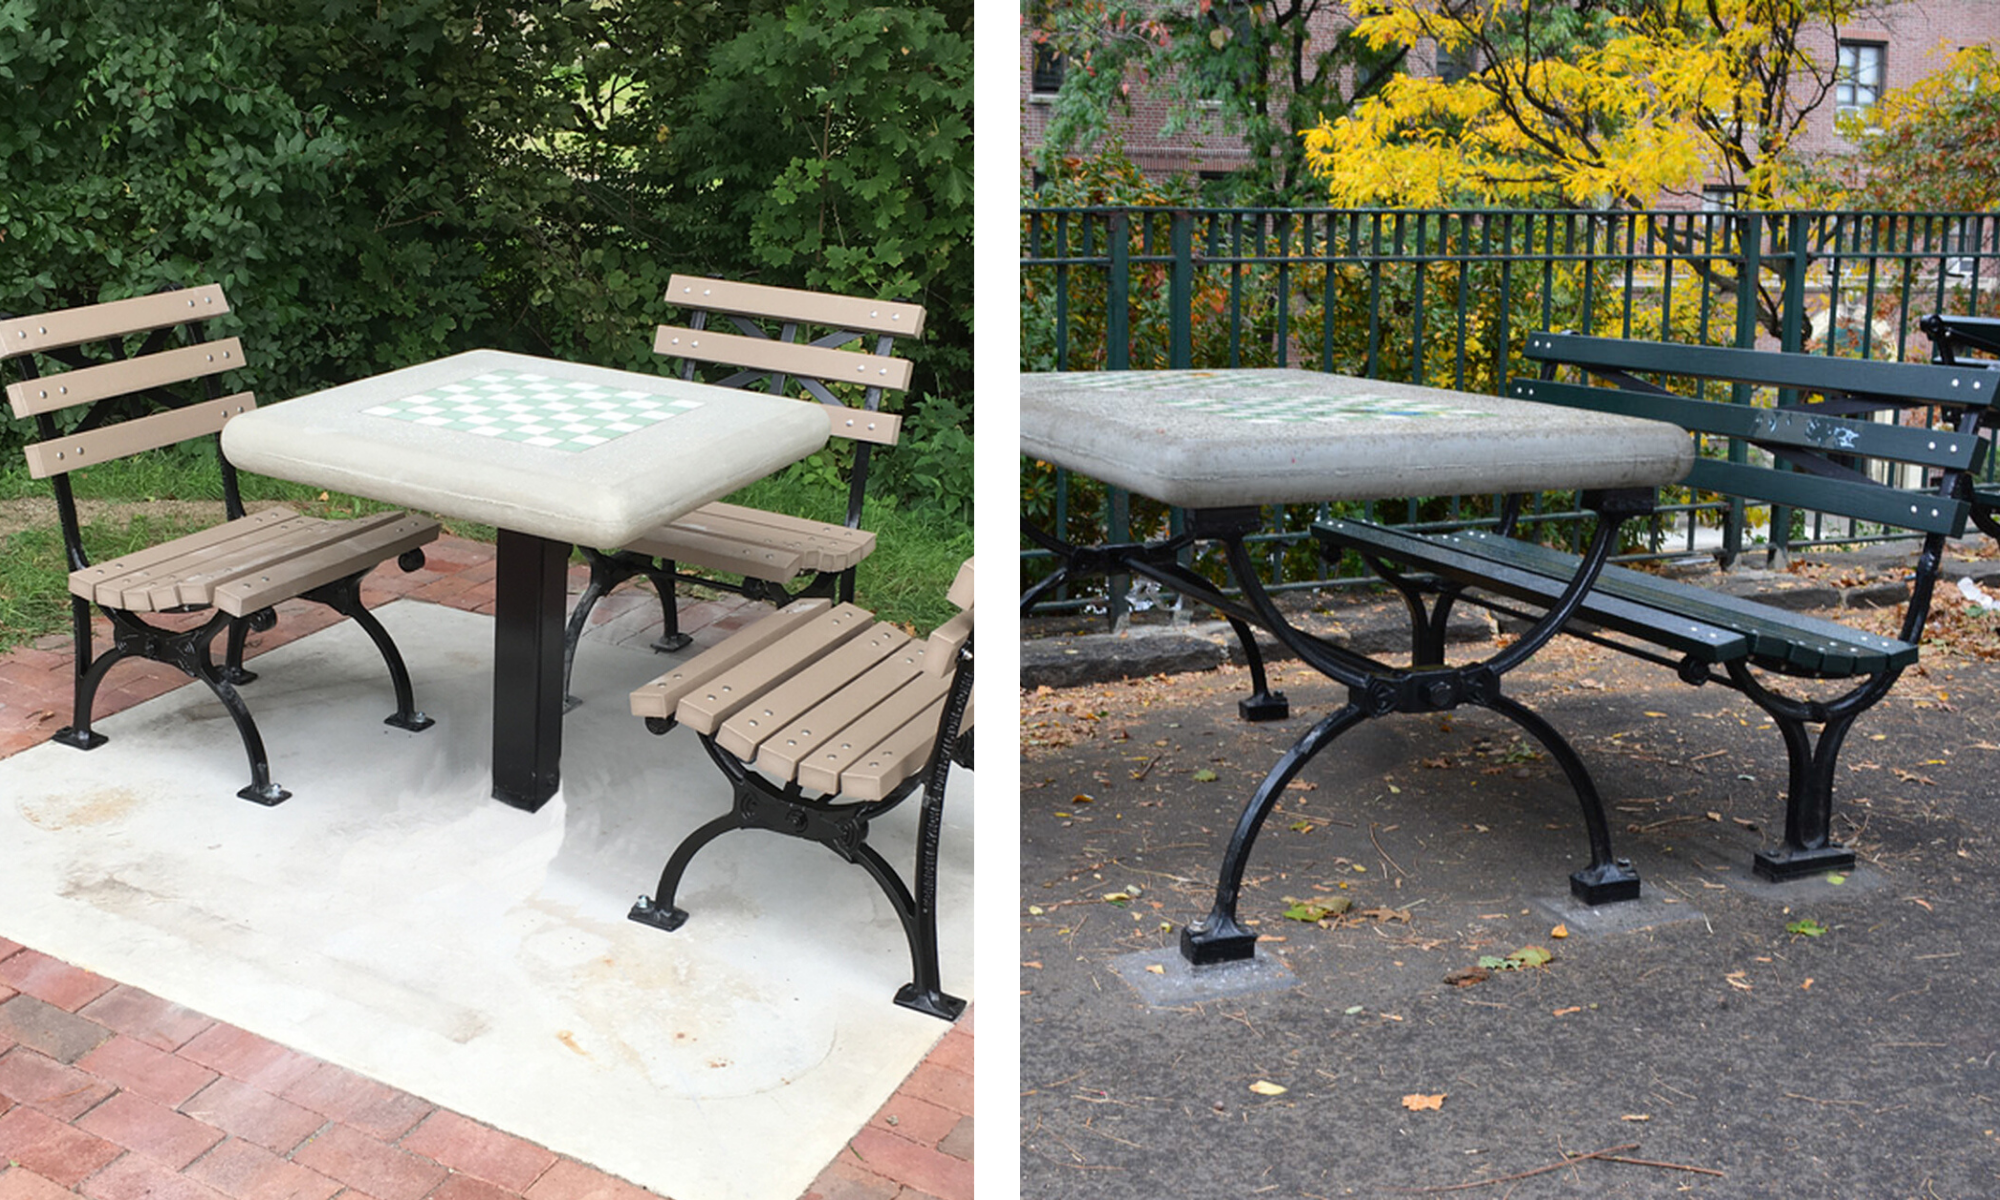 How Kenneth Lynch Shaped the Benches of Central Park - Kenneth